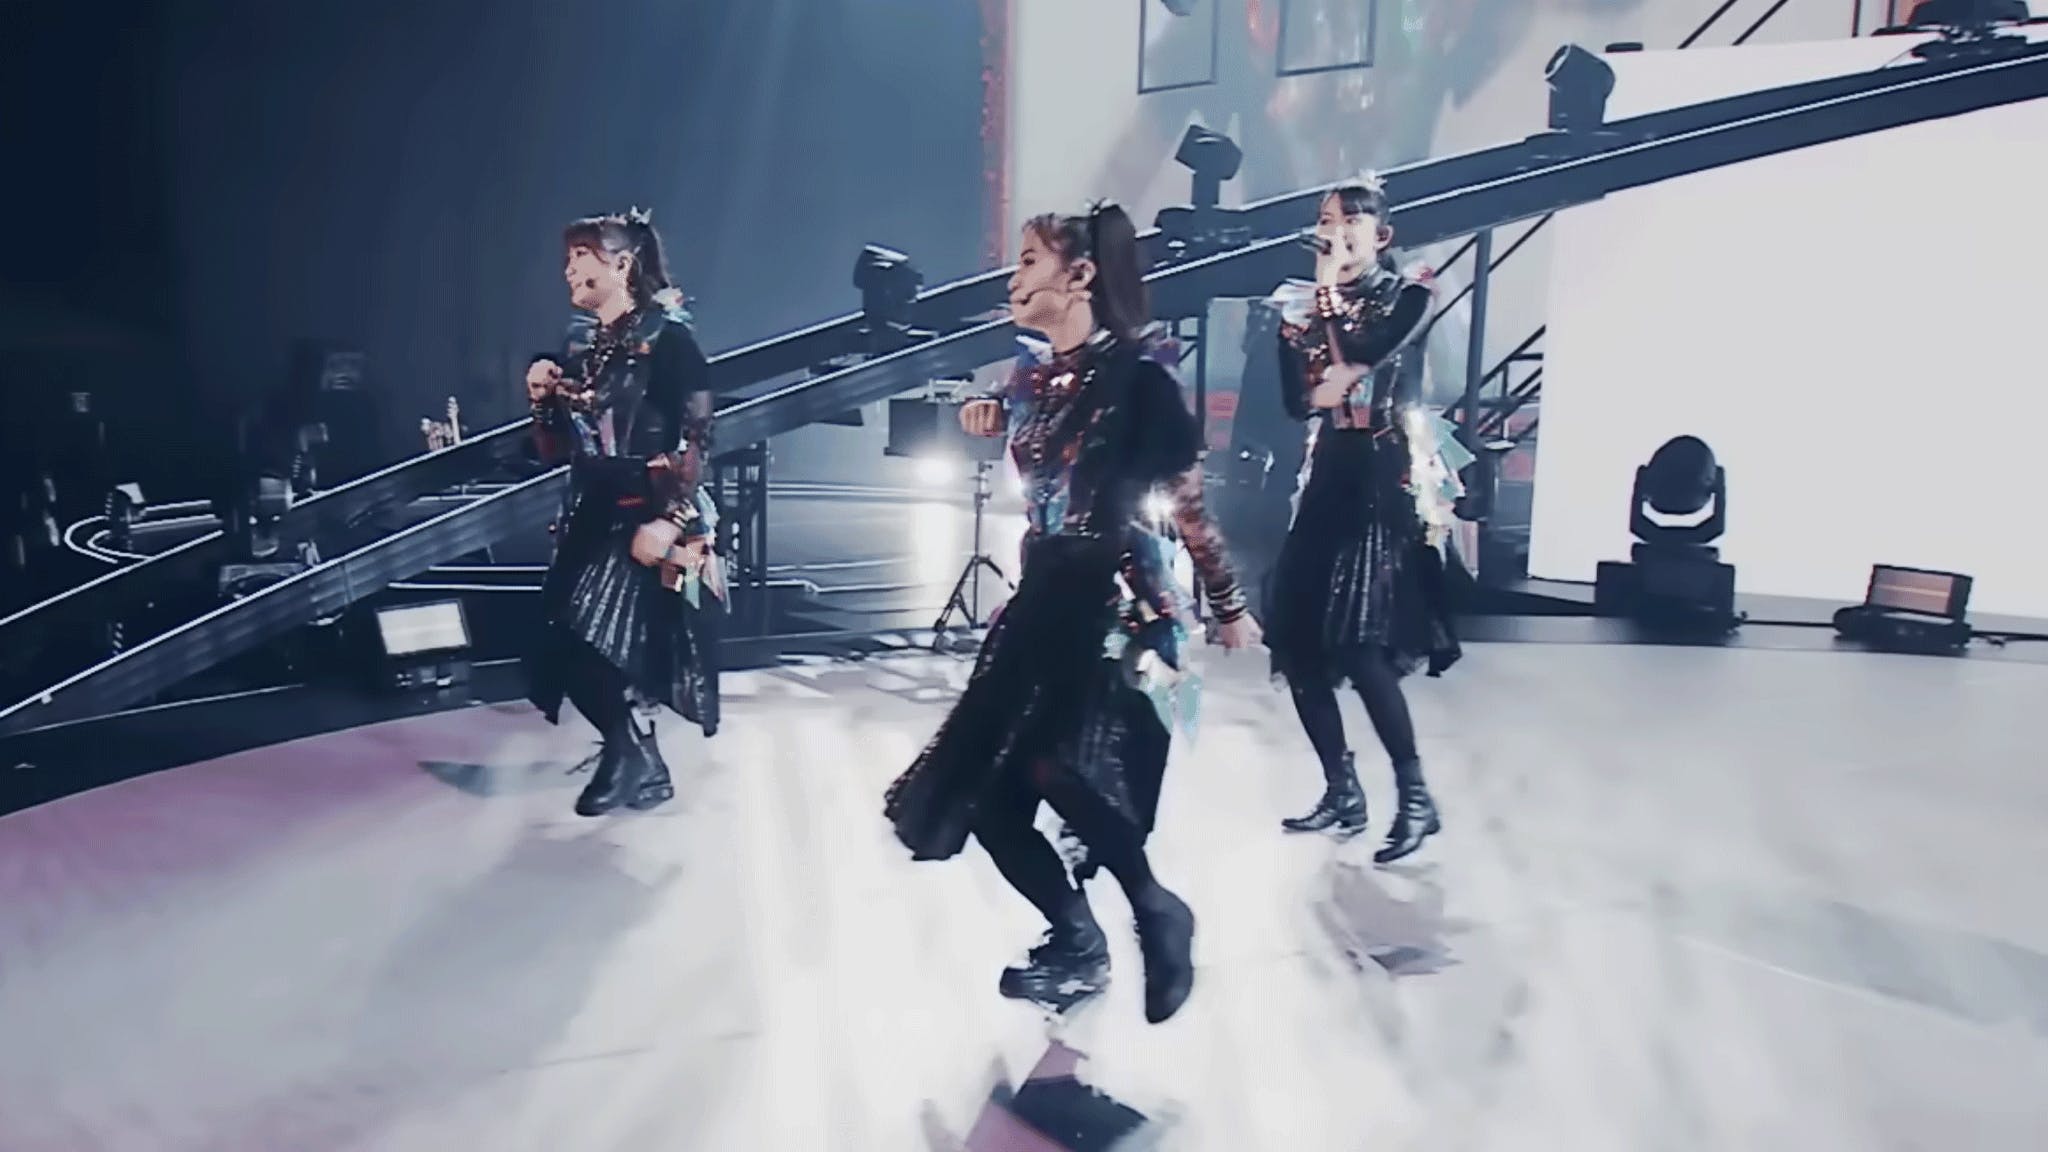 BABYMETAL release first music video featuring new member MOMOMETAL